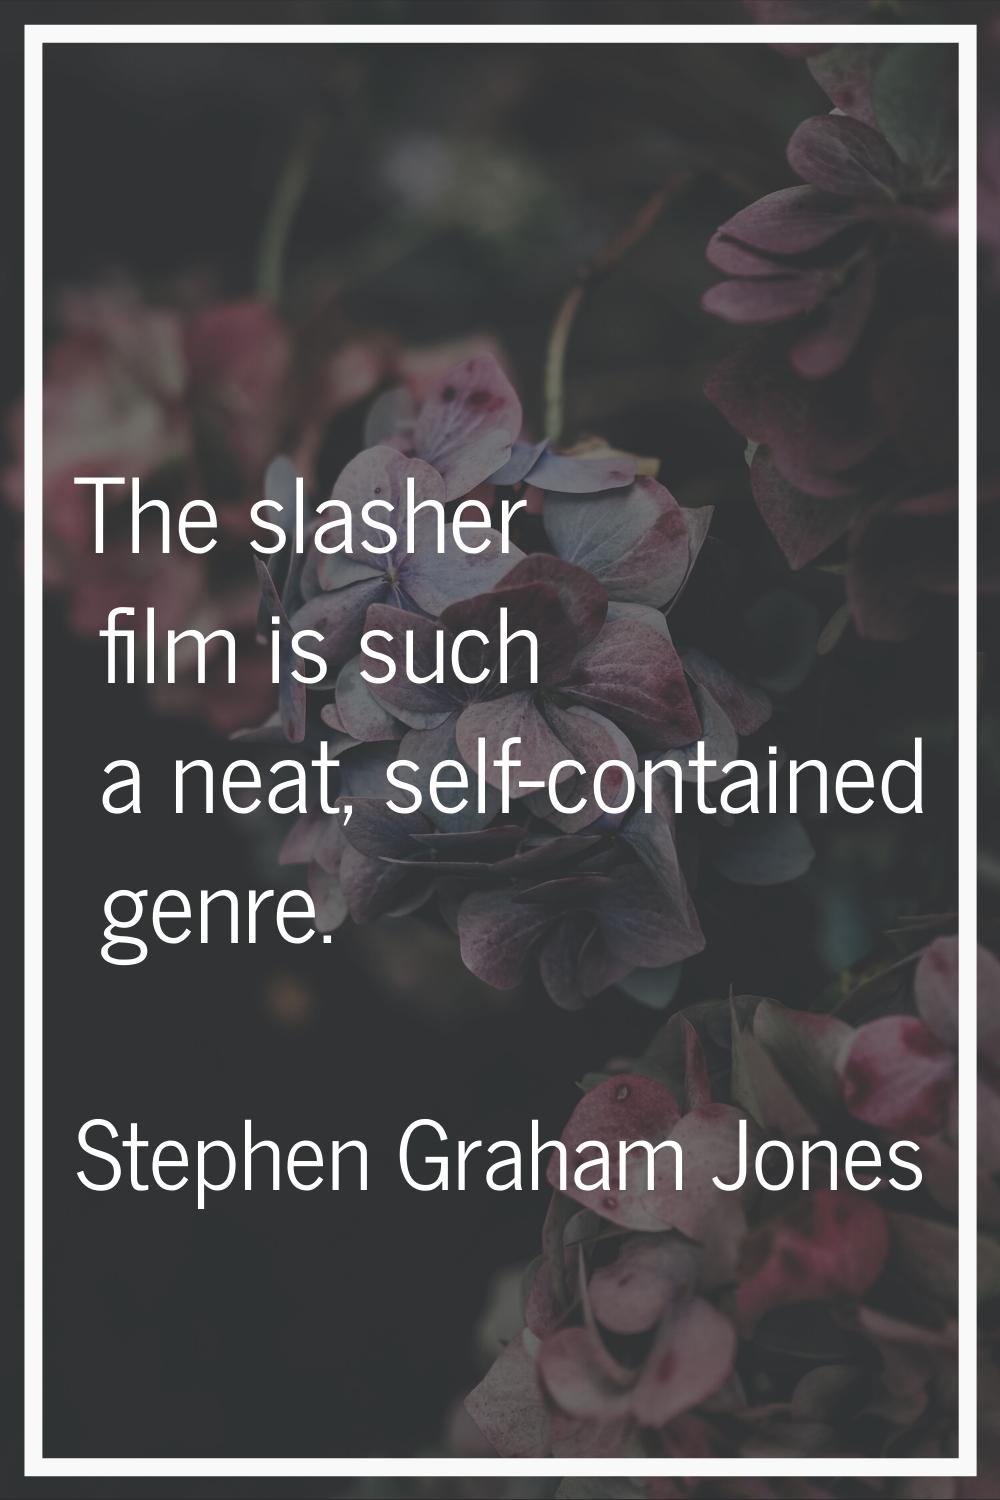 The slasher film is such a neat, self-contained genre.